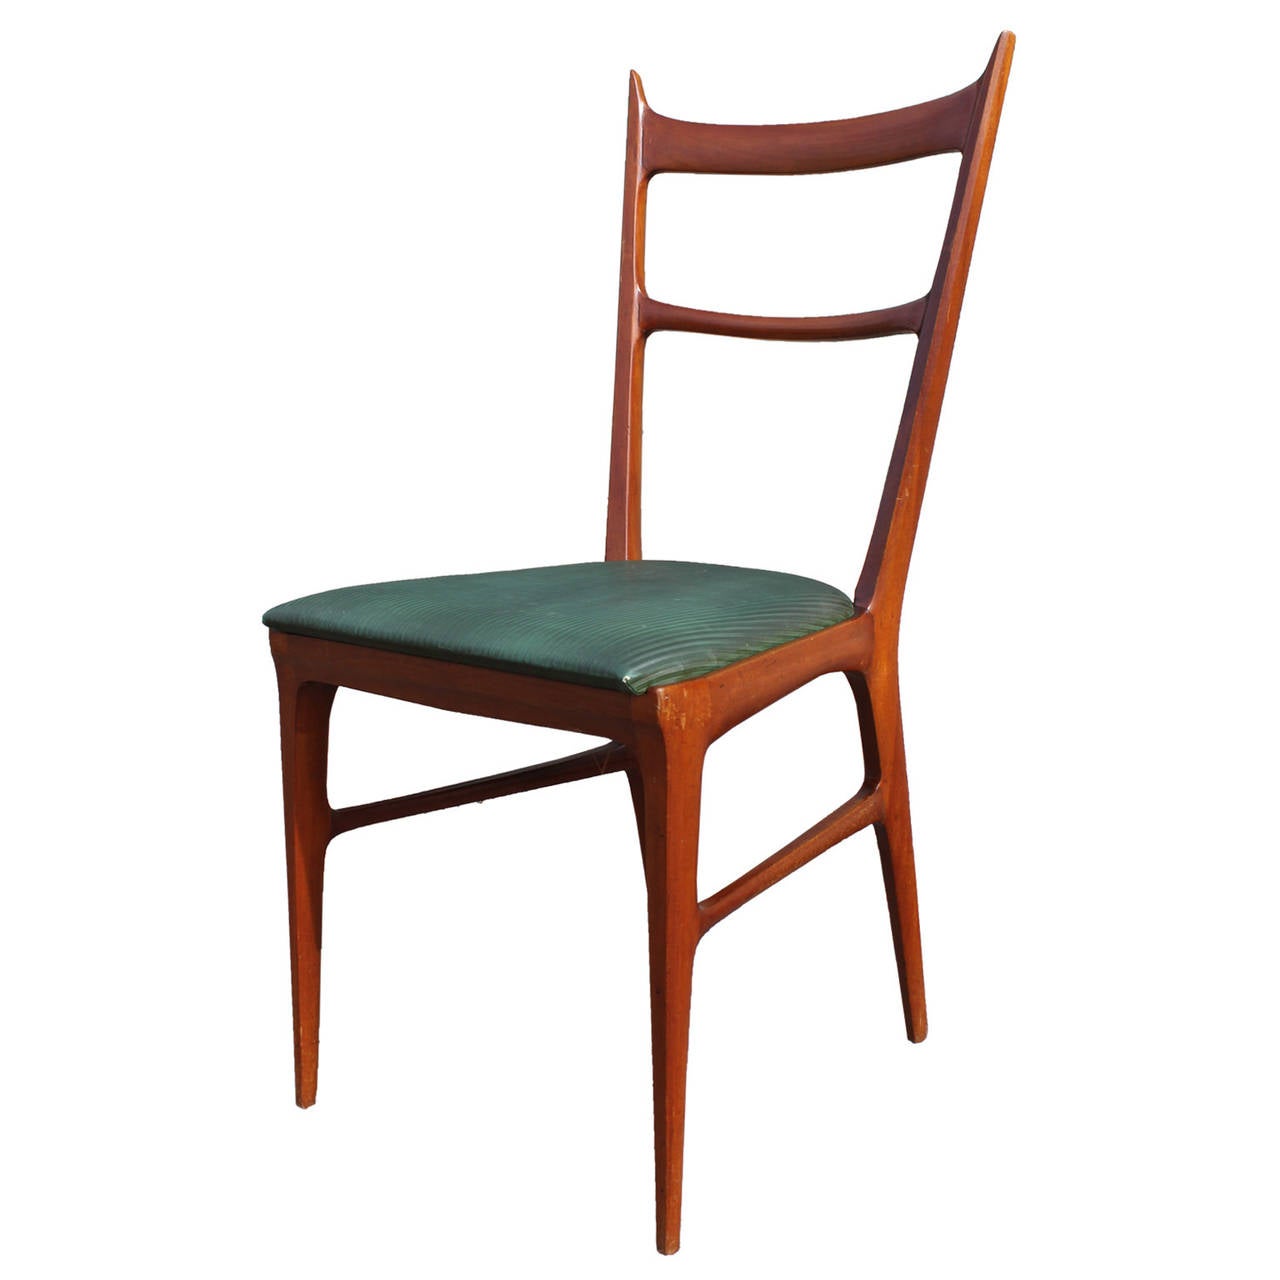 Beautiful set of four Carlo Di Carli Dining Chairs with splayed legs and angled backs. Light Restoration is recommended. Chairs are in good vintage condition.